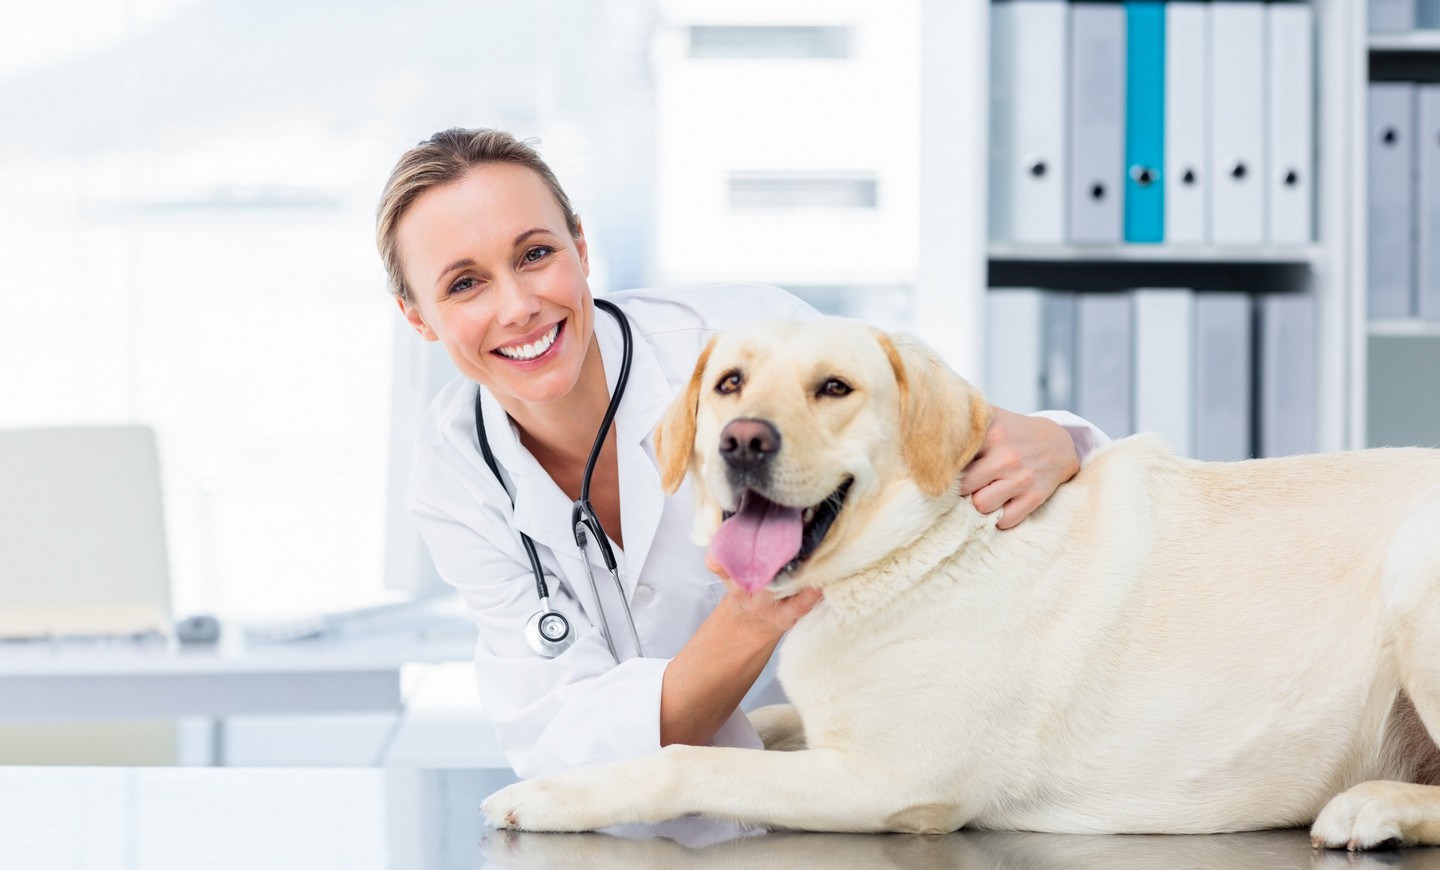 Are you looking for an Emergency veterinarian in the Long Beach, CA Area?